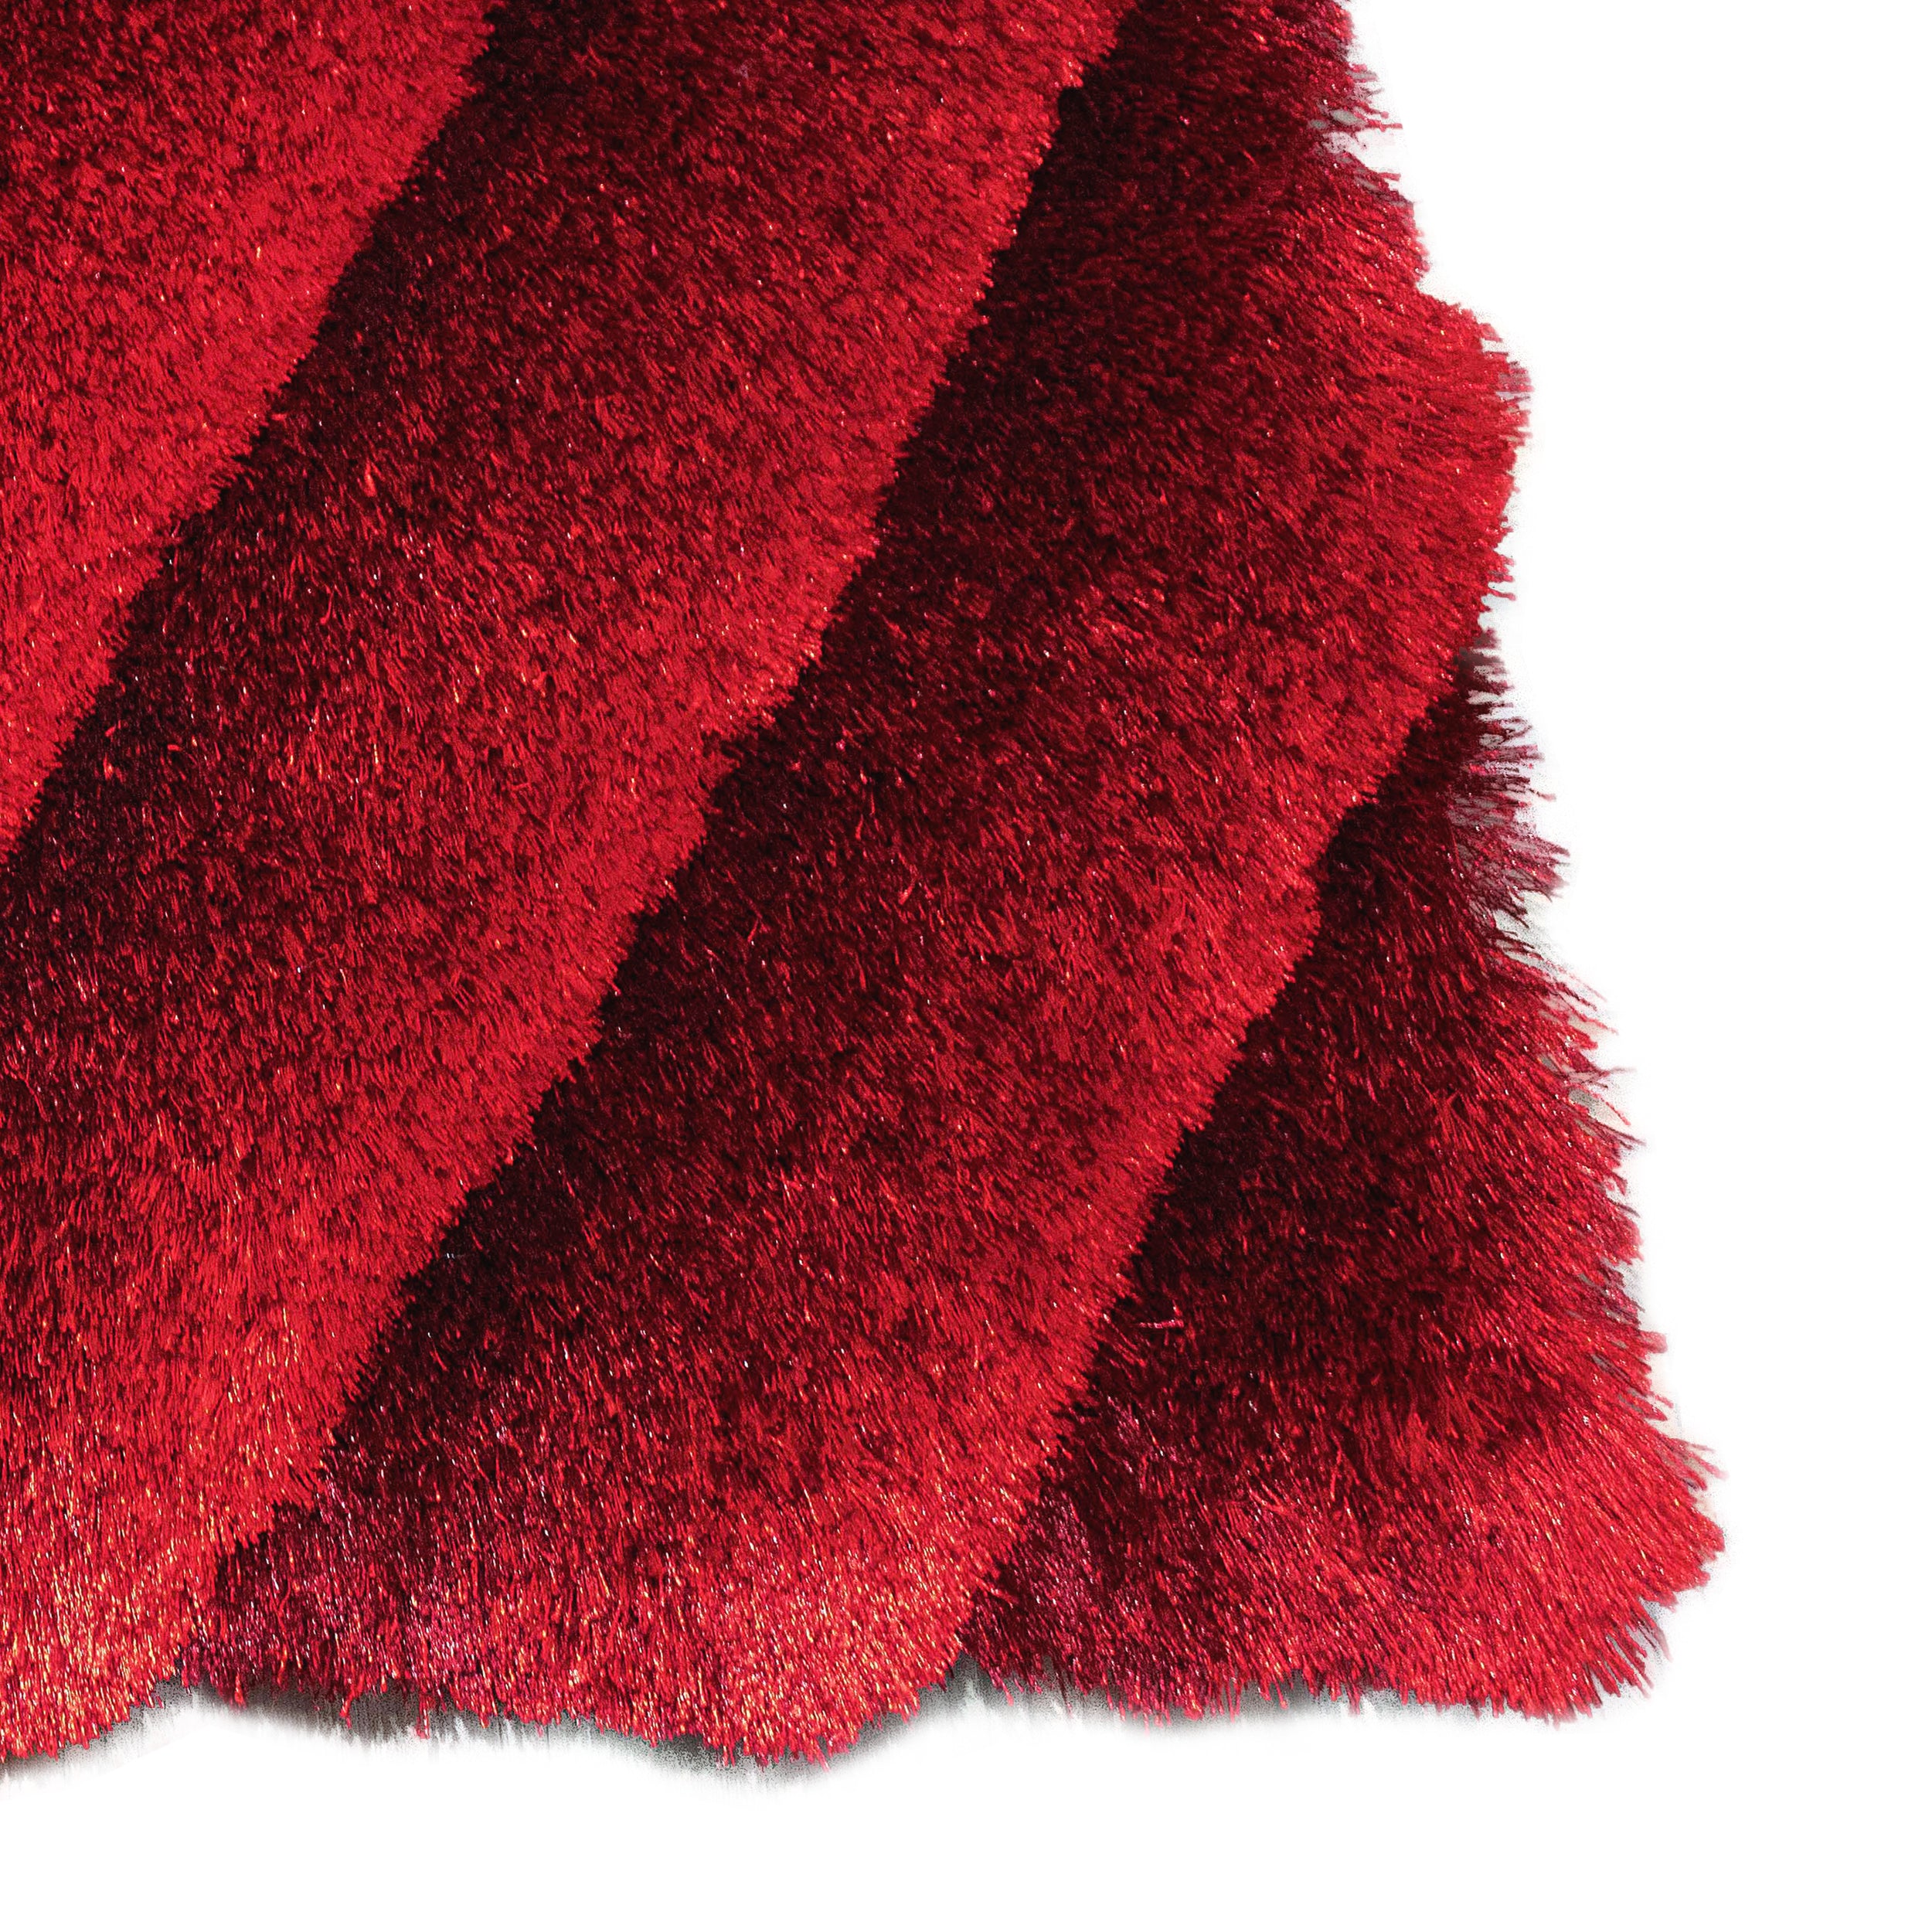 3D 259 Abstract Shaggy Modern Contemporary Area Rug Red Laruglinens